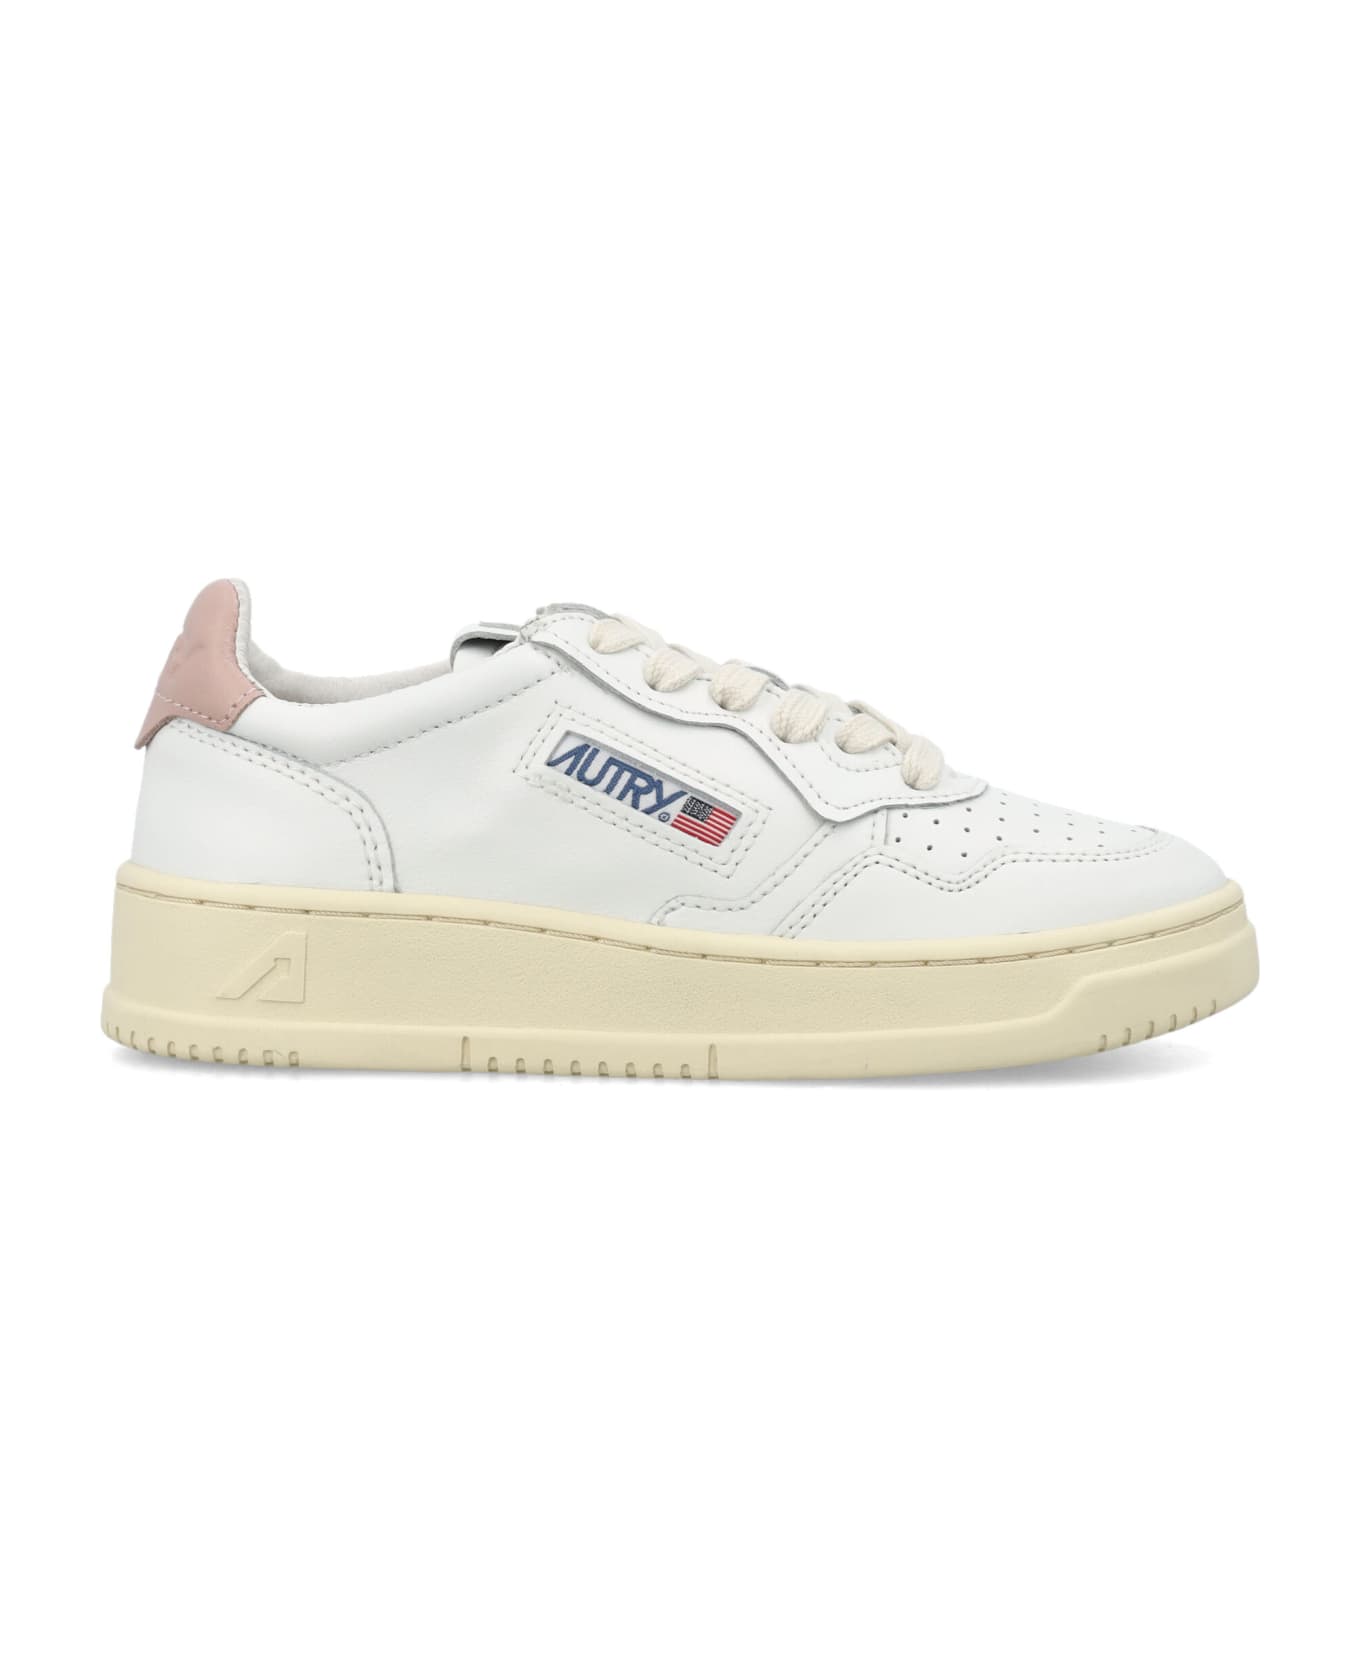 Autry Medalist Low Sneakers - WHITE PINK